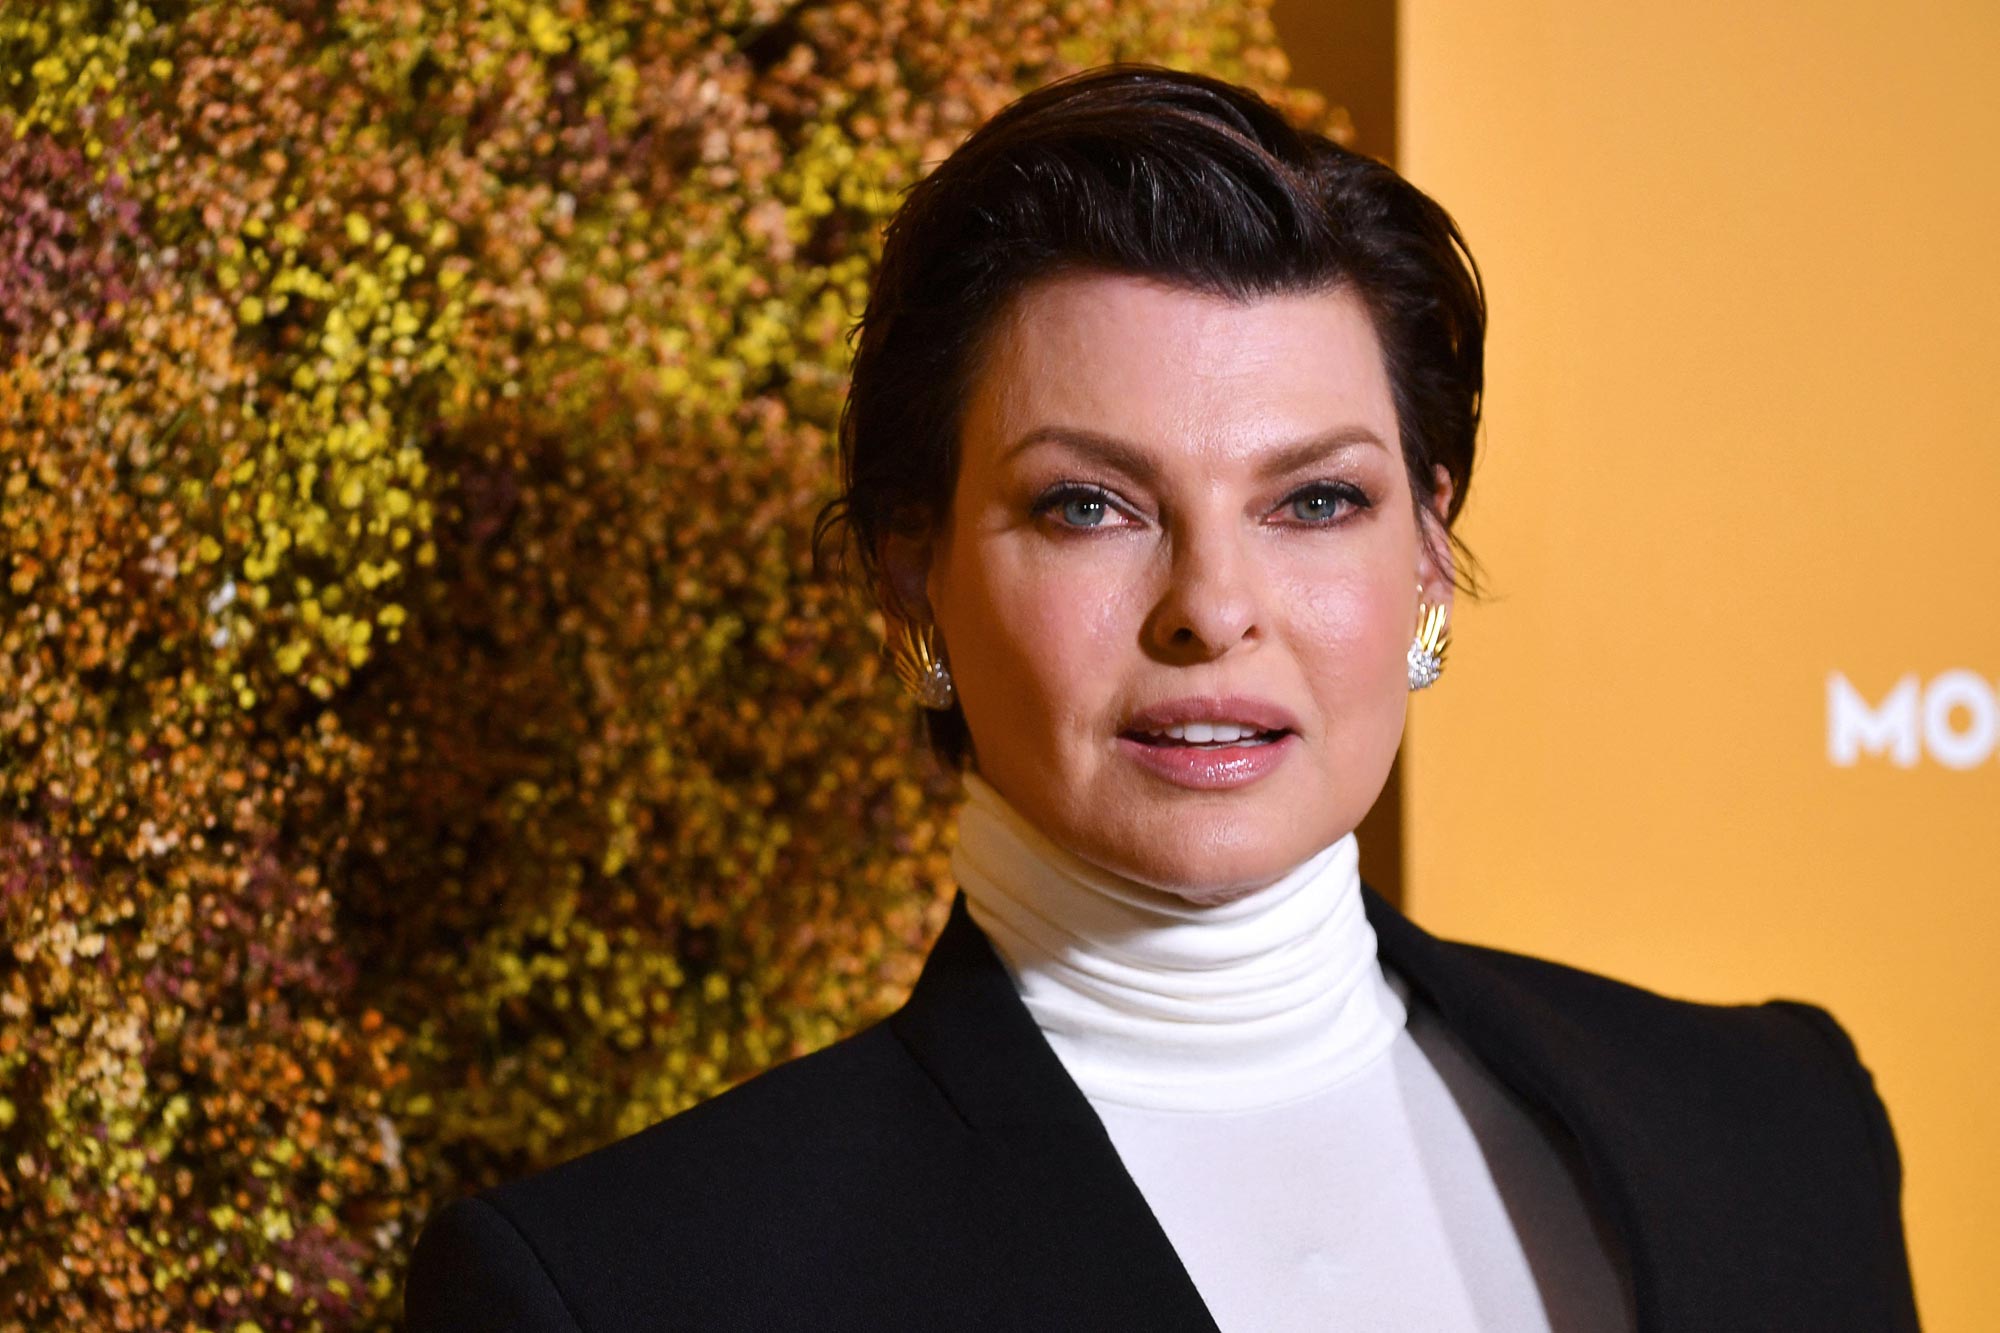 Linda Evangelista on dating: I don't want to hear breathing - Los